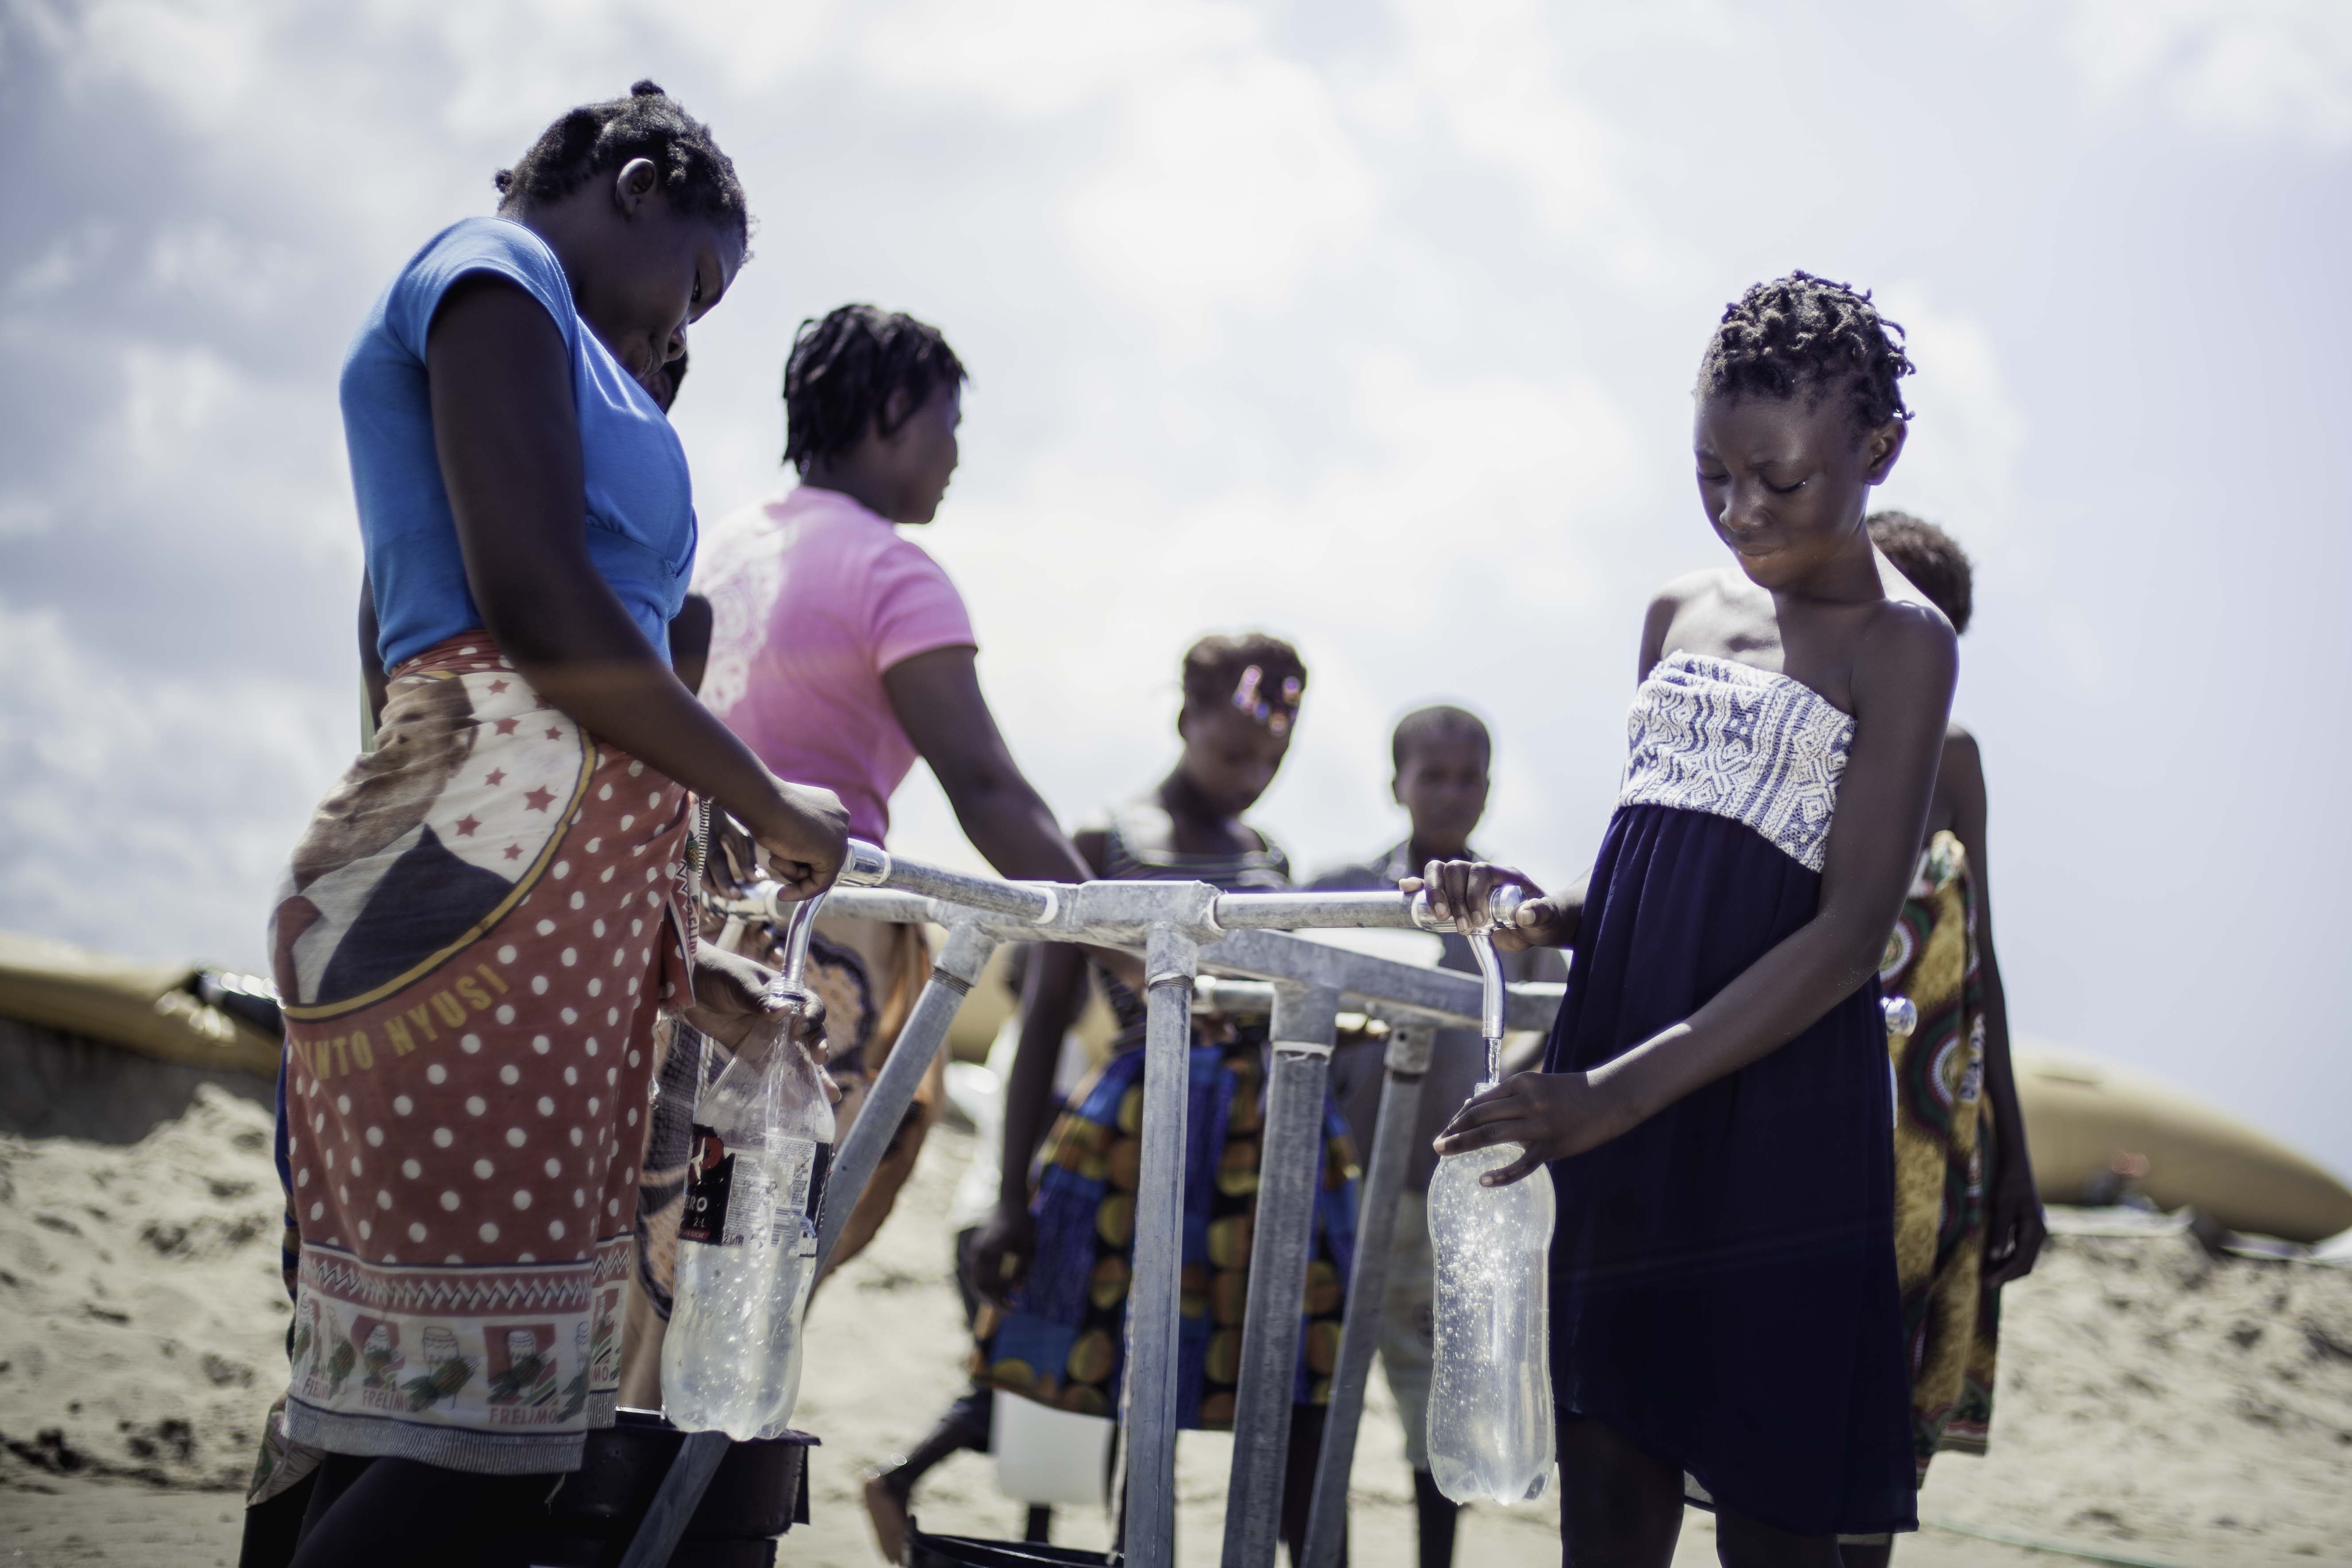 Teresa Jone Vilanculos (right), 14, filling her bottle at the tap stand. She fled her village, Mangalaforte, together with her family when their house was washed away by Cyclone Idai. (Photo: Micas Mondlane / Oxfam Novib)